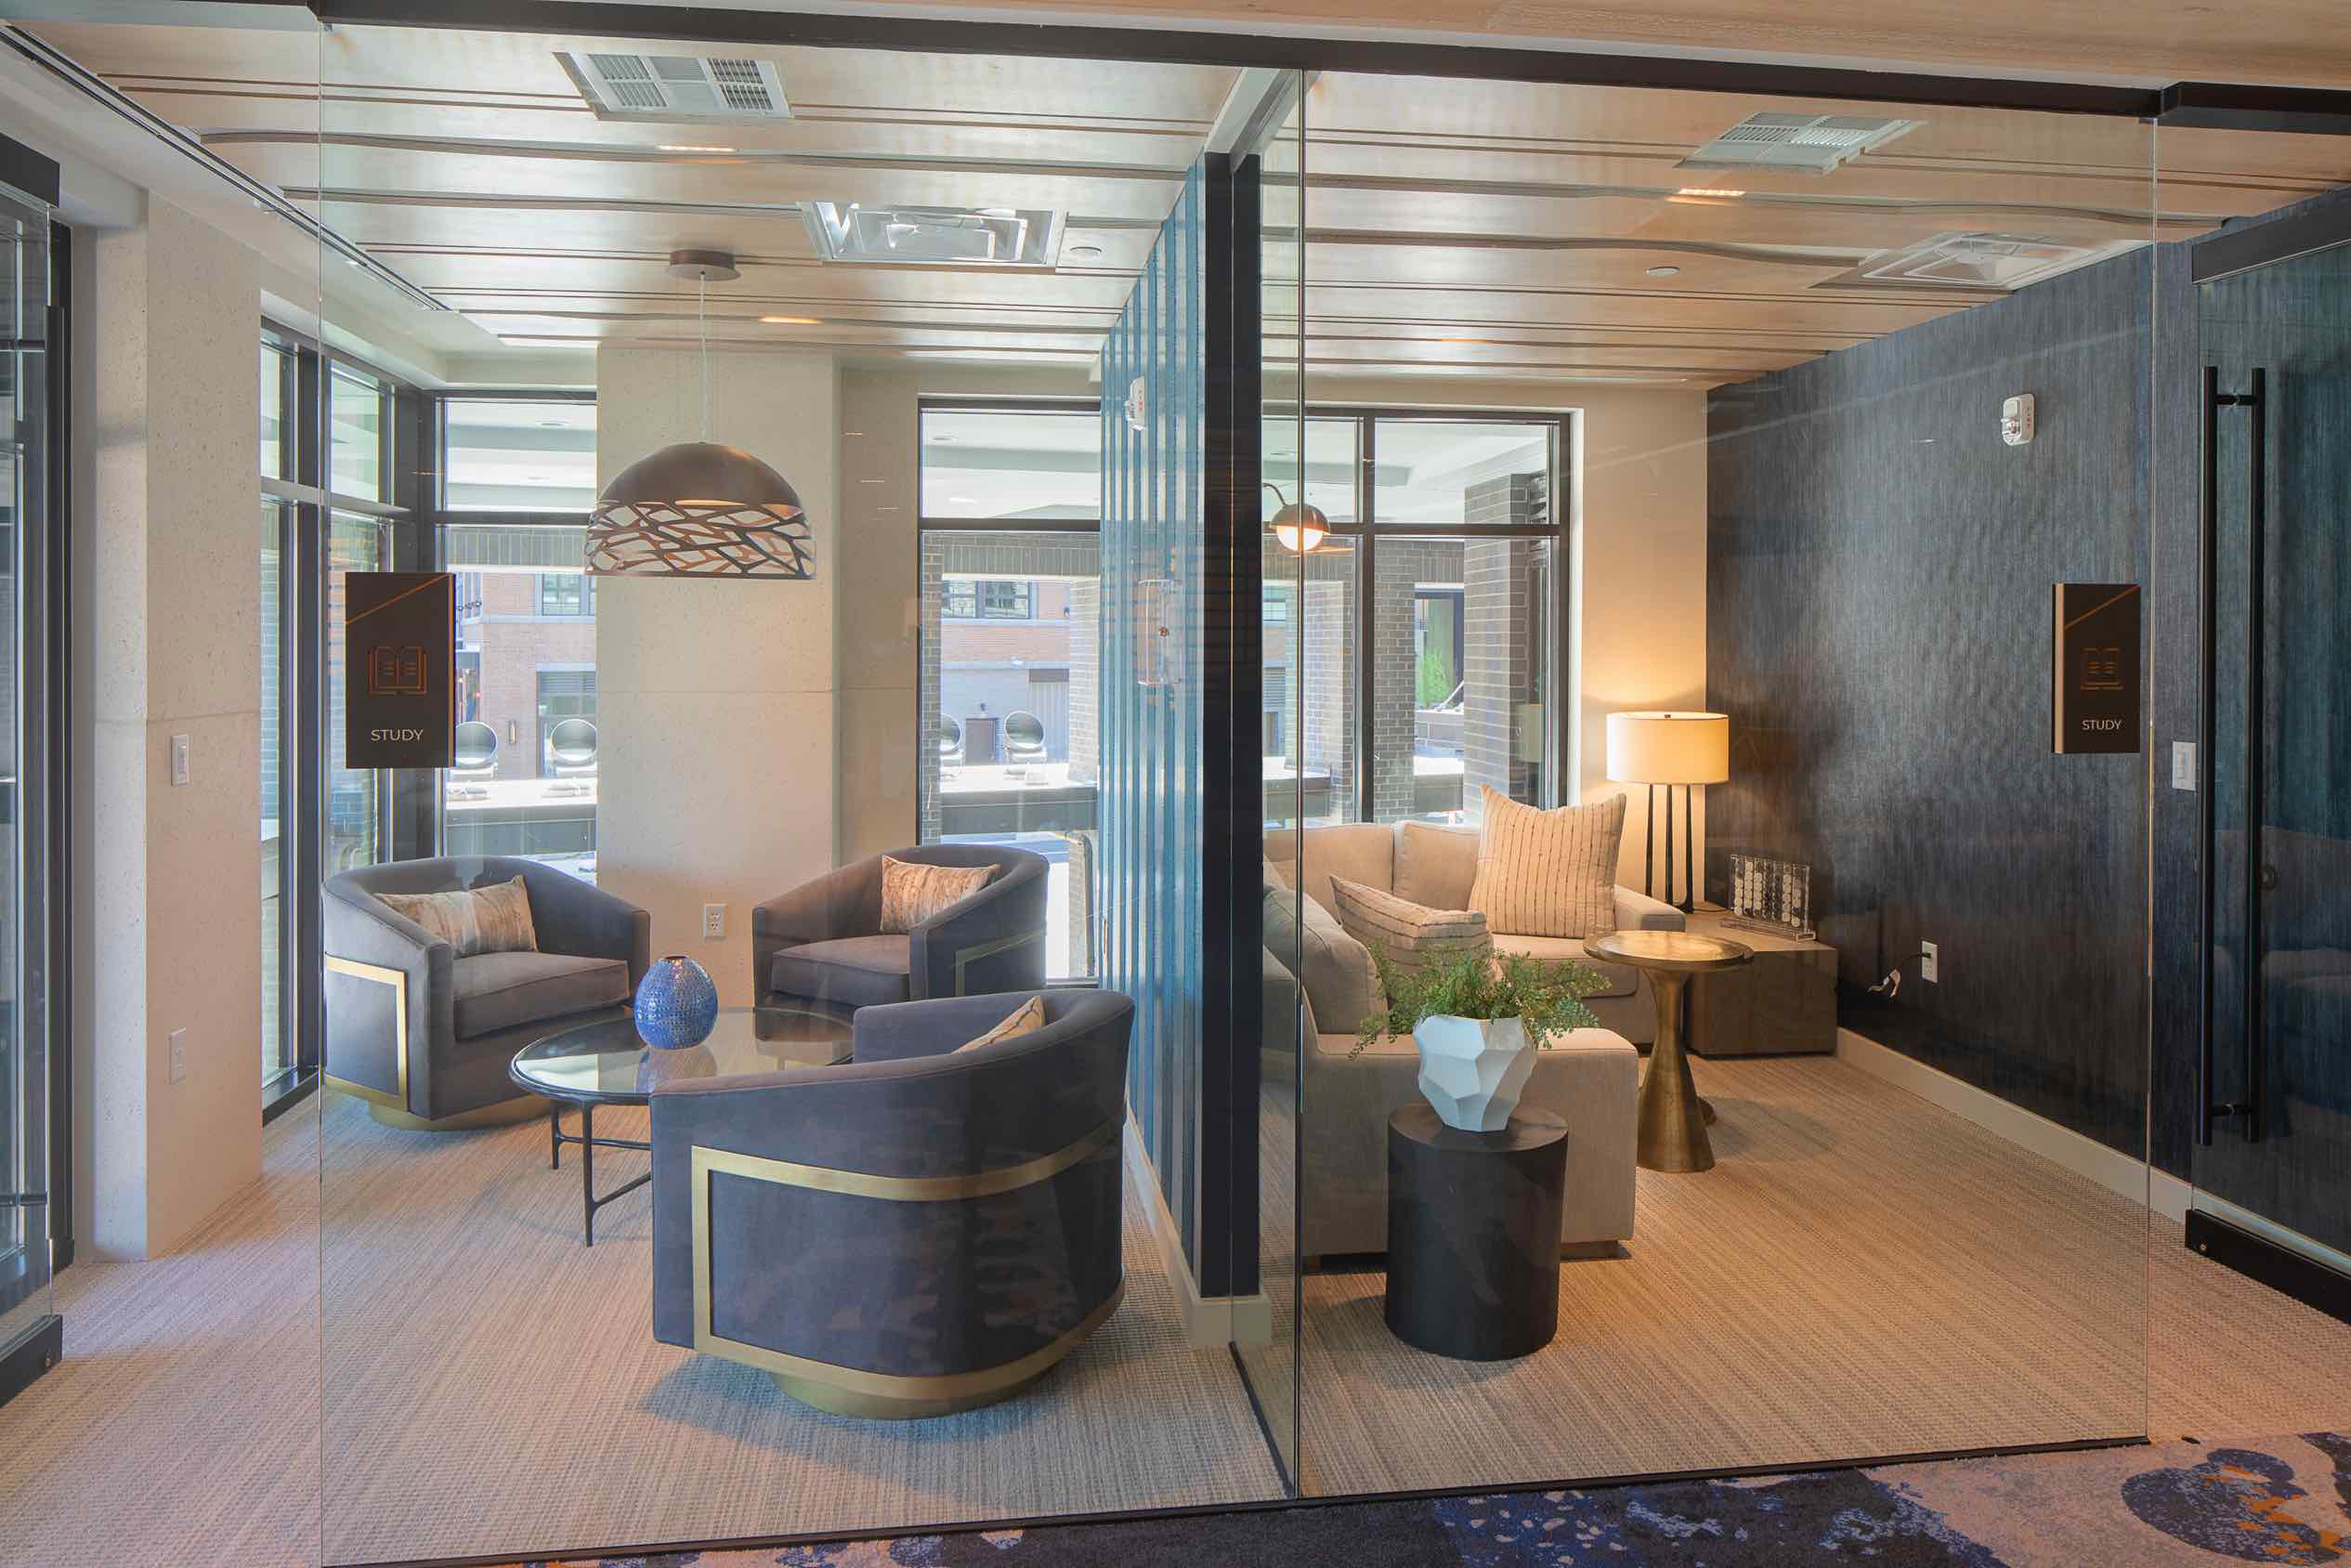 Meeting rooms with glass walls & comfortable couches. One of the amenities of 250 Mission in Baltimore, MD.